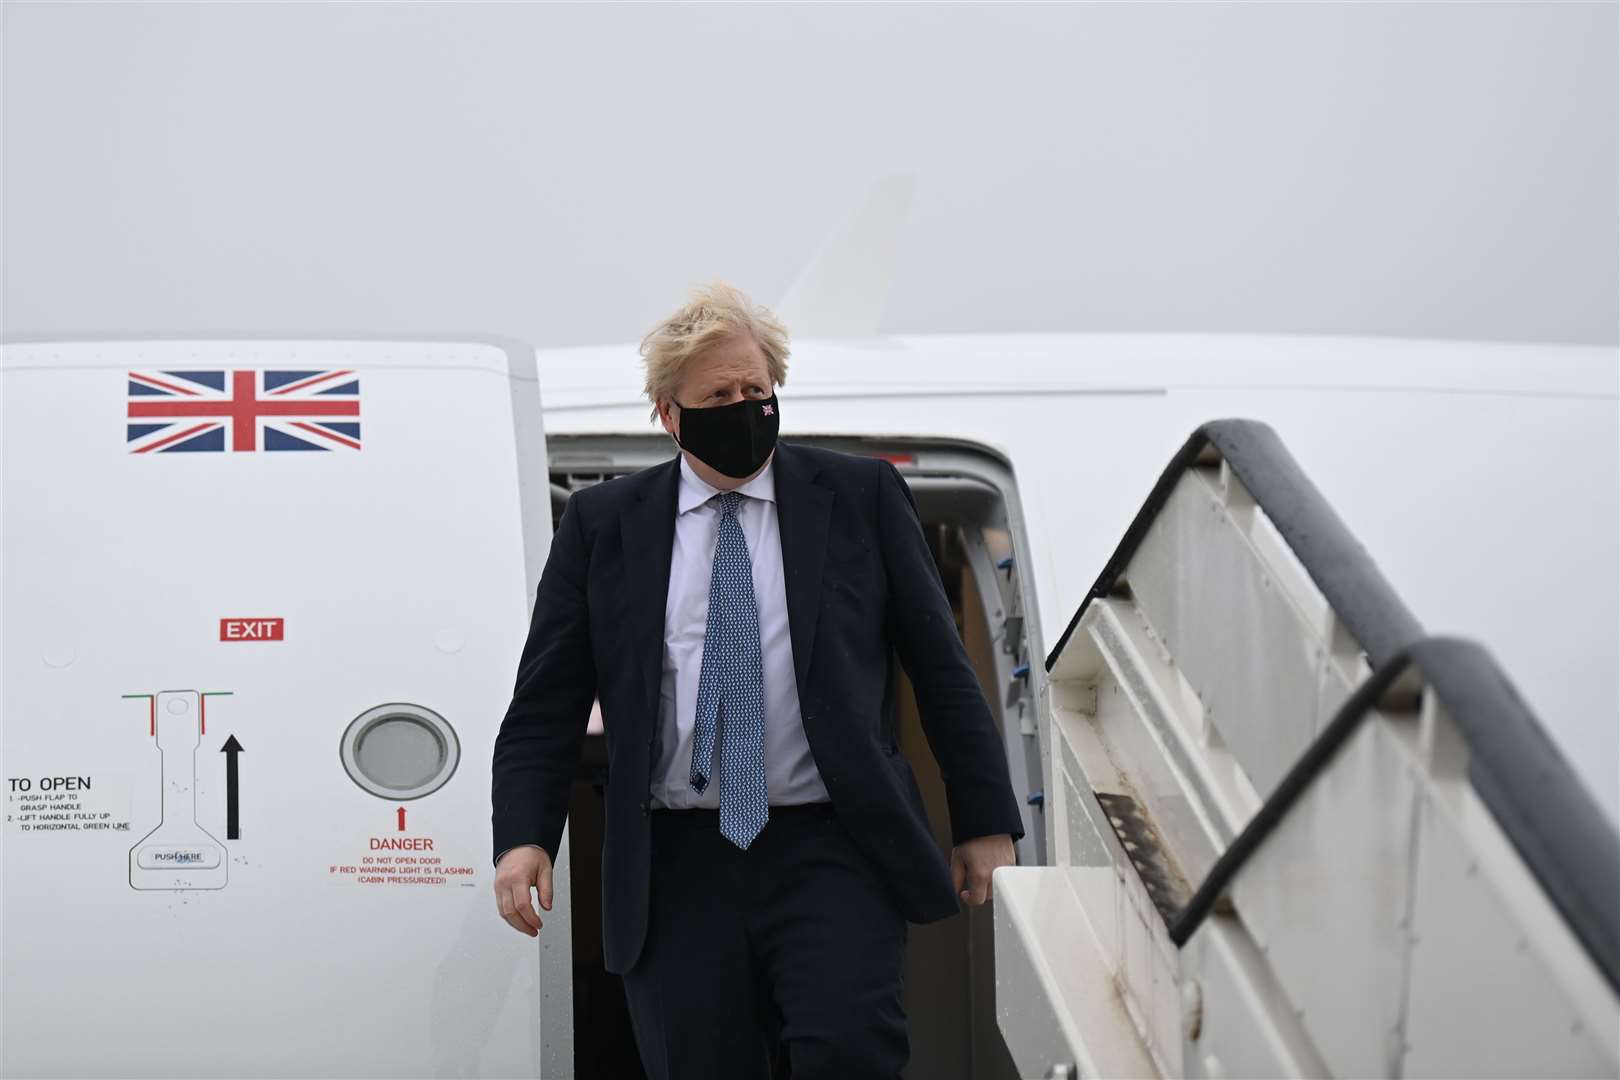 Mr Johnson arriving in Brussels (PA)